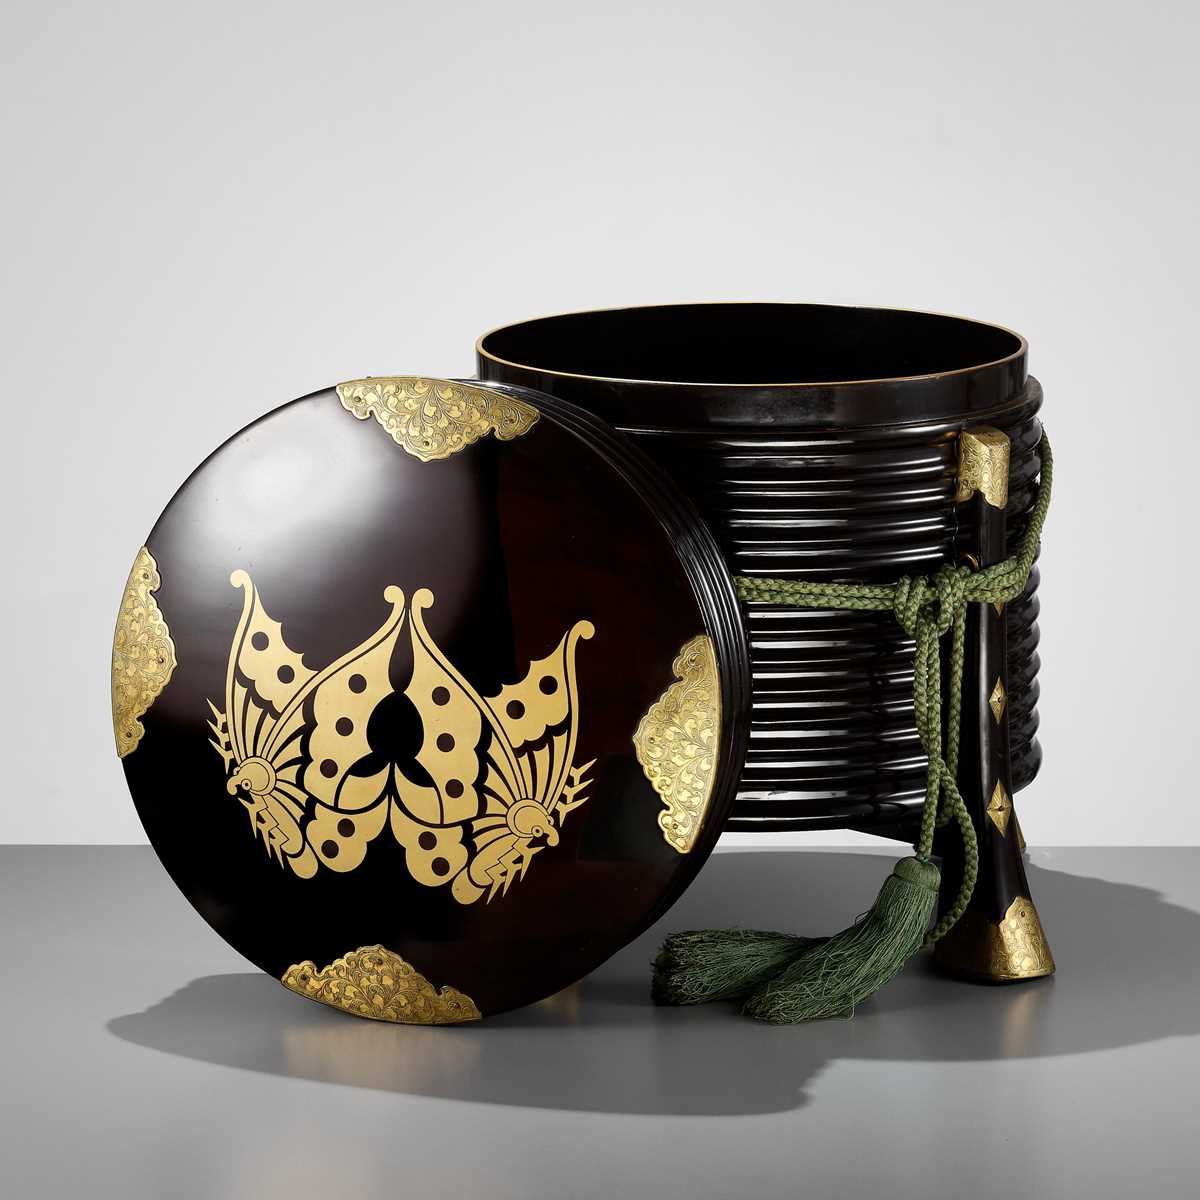 Lot 4 - A BLACK AND GOLD LACQUER HOKAI (FOOD CONTAINER)